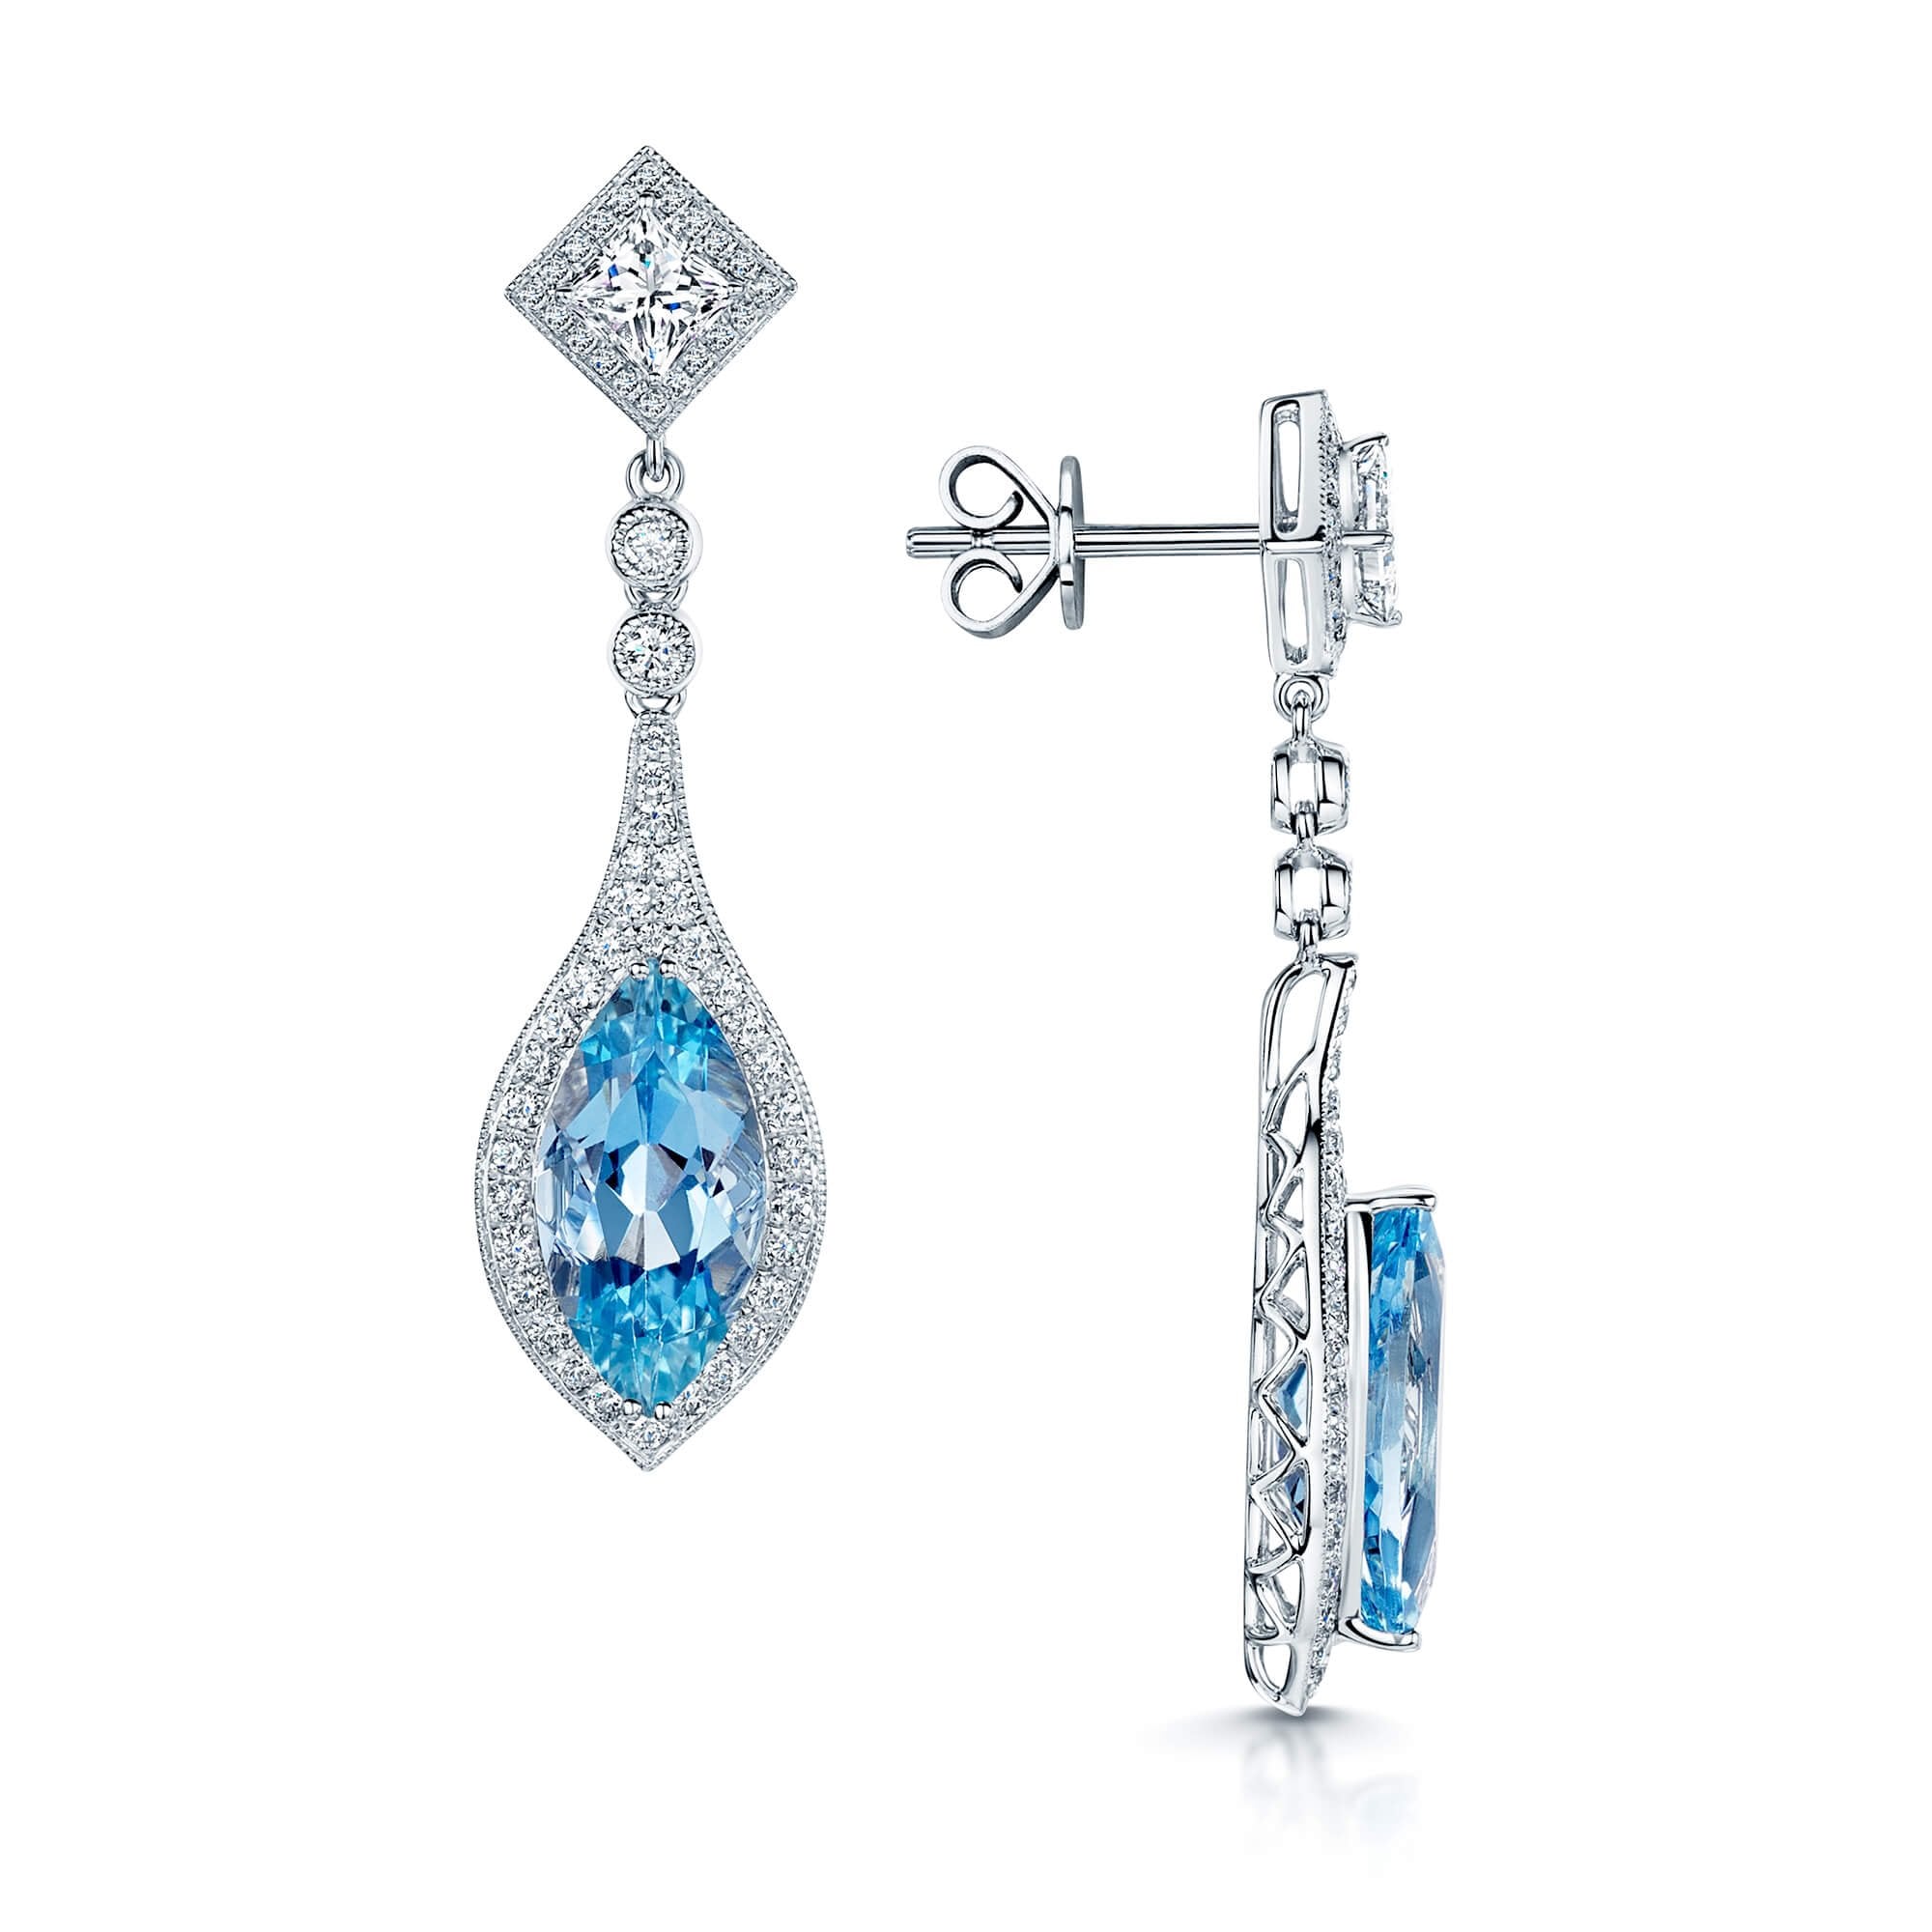 18ct White Gold Marquise Aquamarine And Diamond Stud Drop Earrings With A Grain Setting